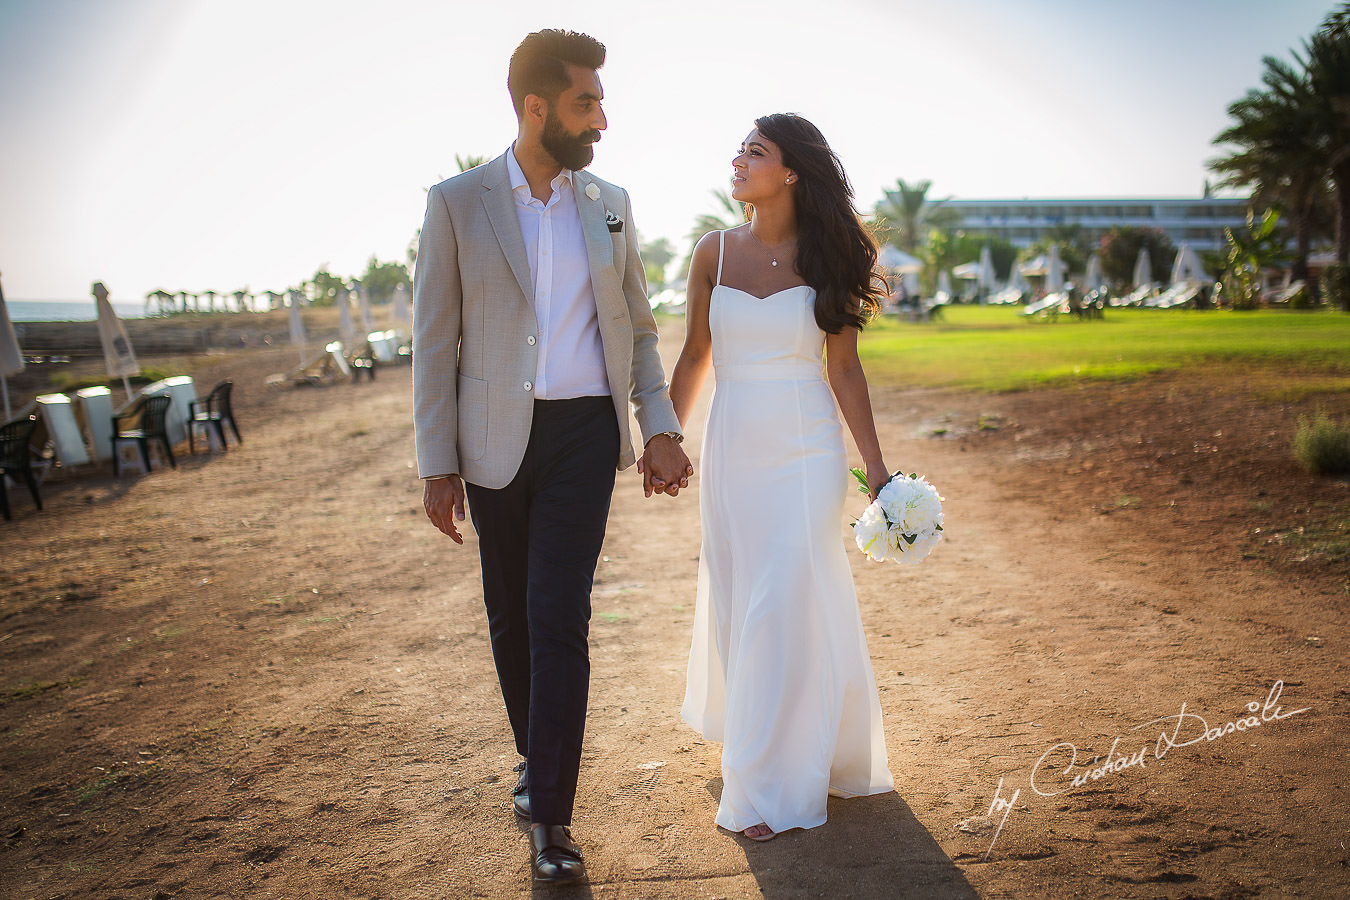 Harpreet and Sabrina photographed by Cristian Dascalu at Athena Beach Hotel in Paphos, Cyprus, during a symbolic wedding.